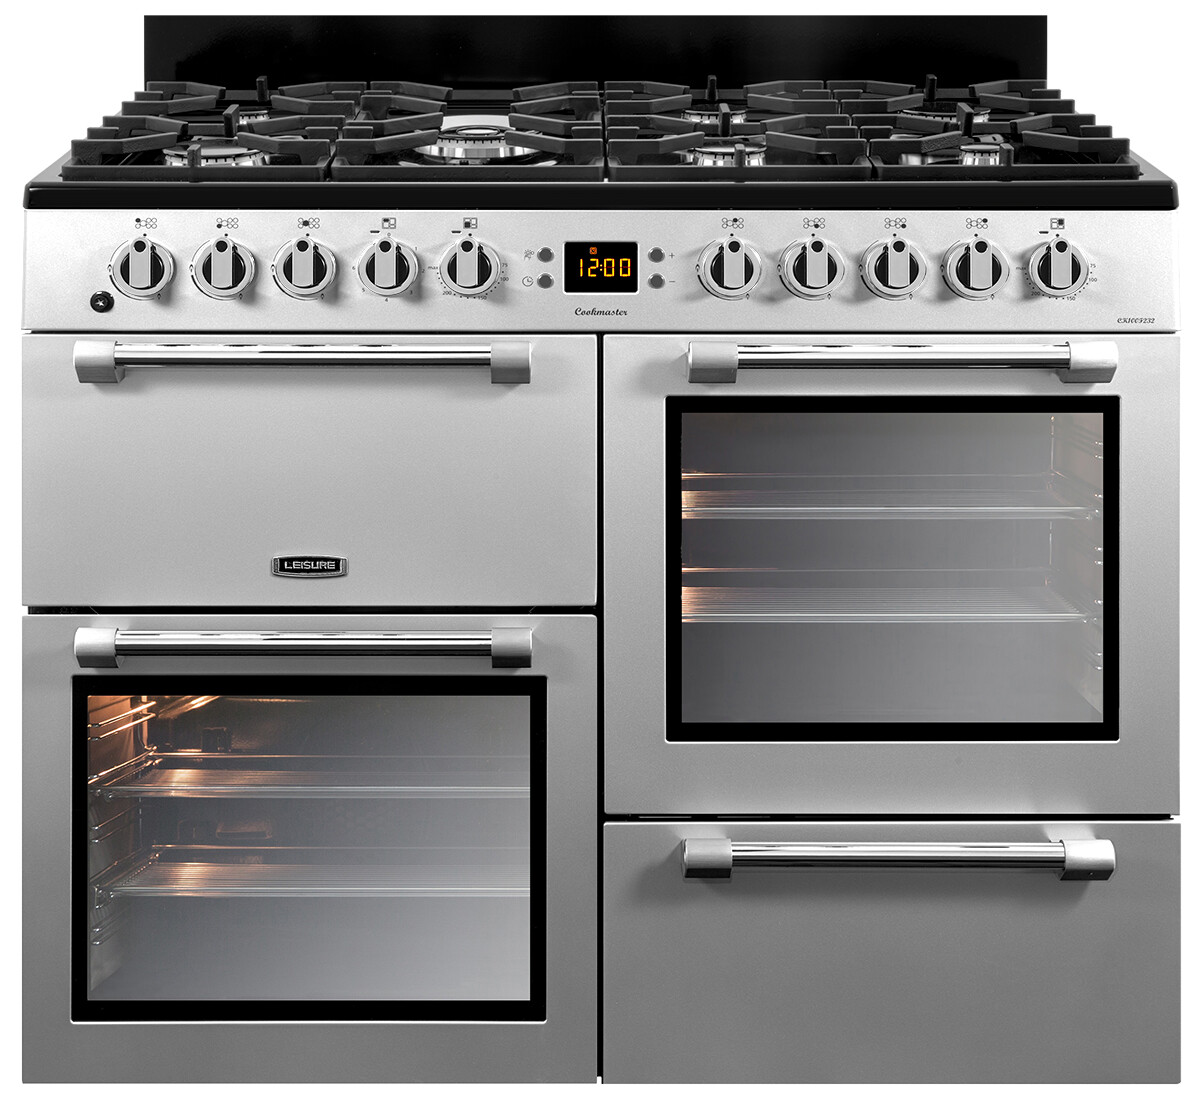 Leisure Cookmaster 100 CK100F232S 100cm Dual Fuel Range Cooker – Silver – A/A Rated #364965